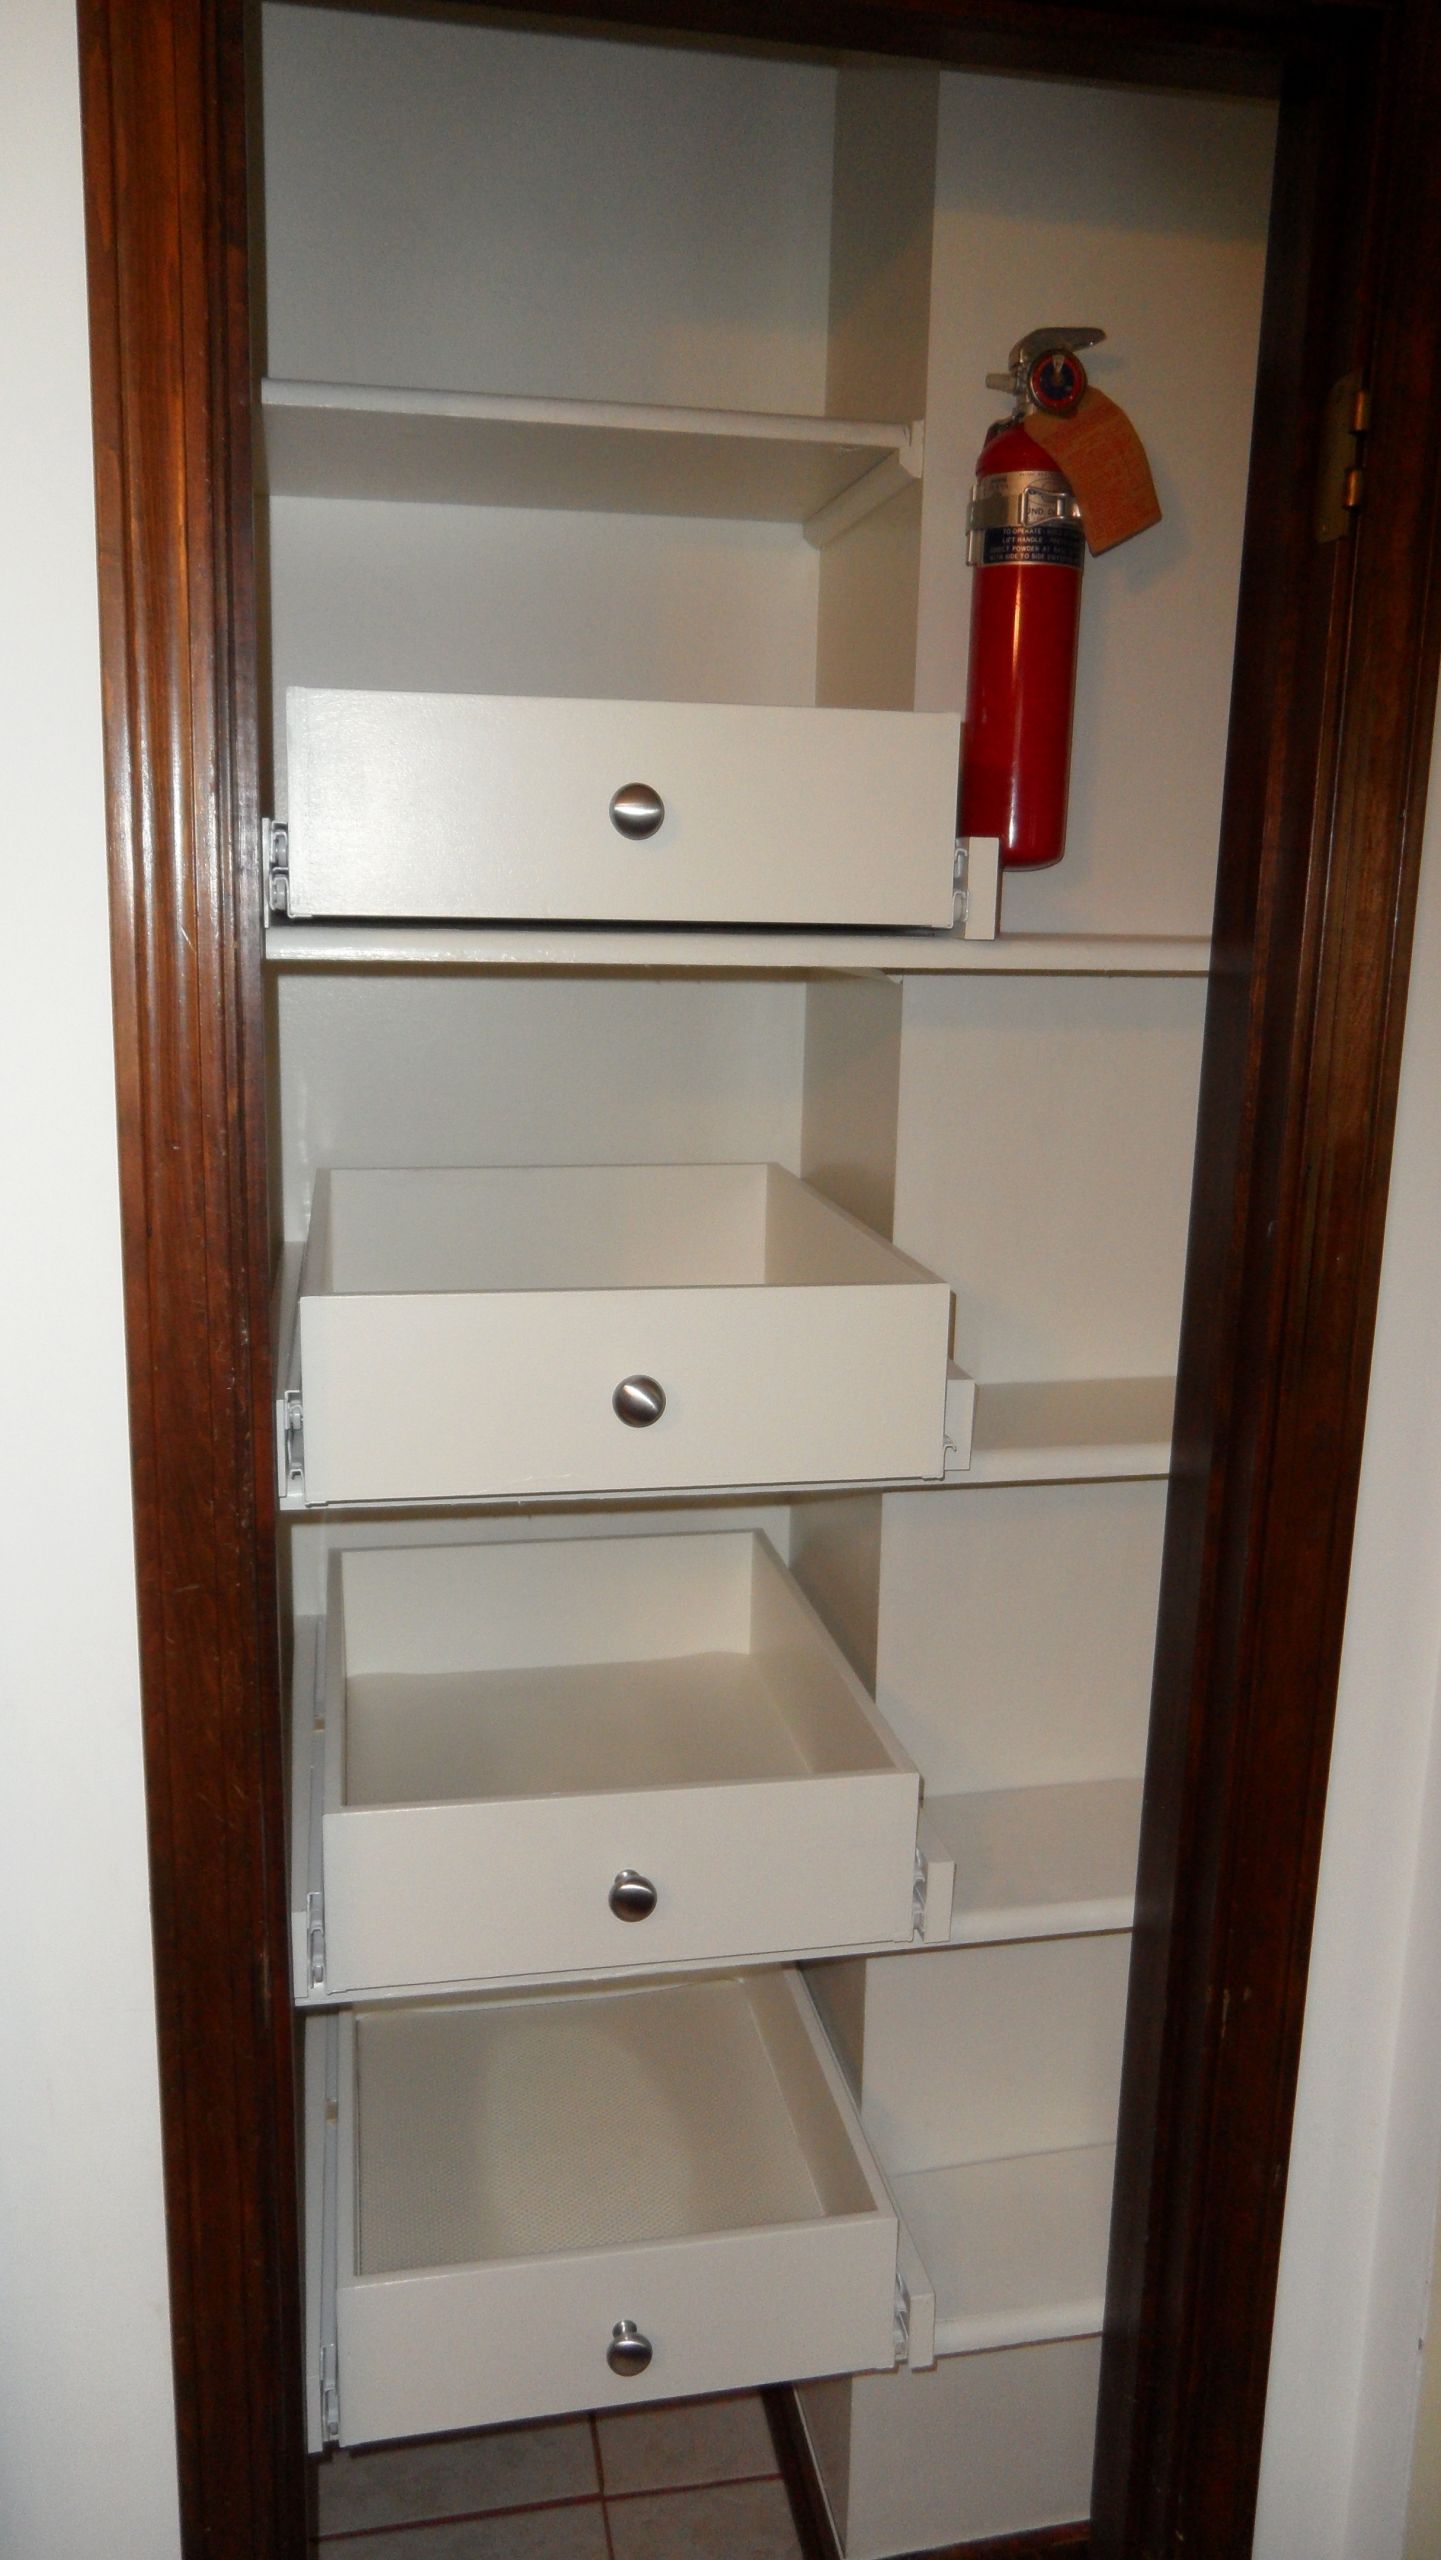 Kitchen Cabinet Storage Shelf
 15 of Cupboard With Shelves